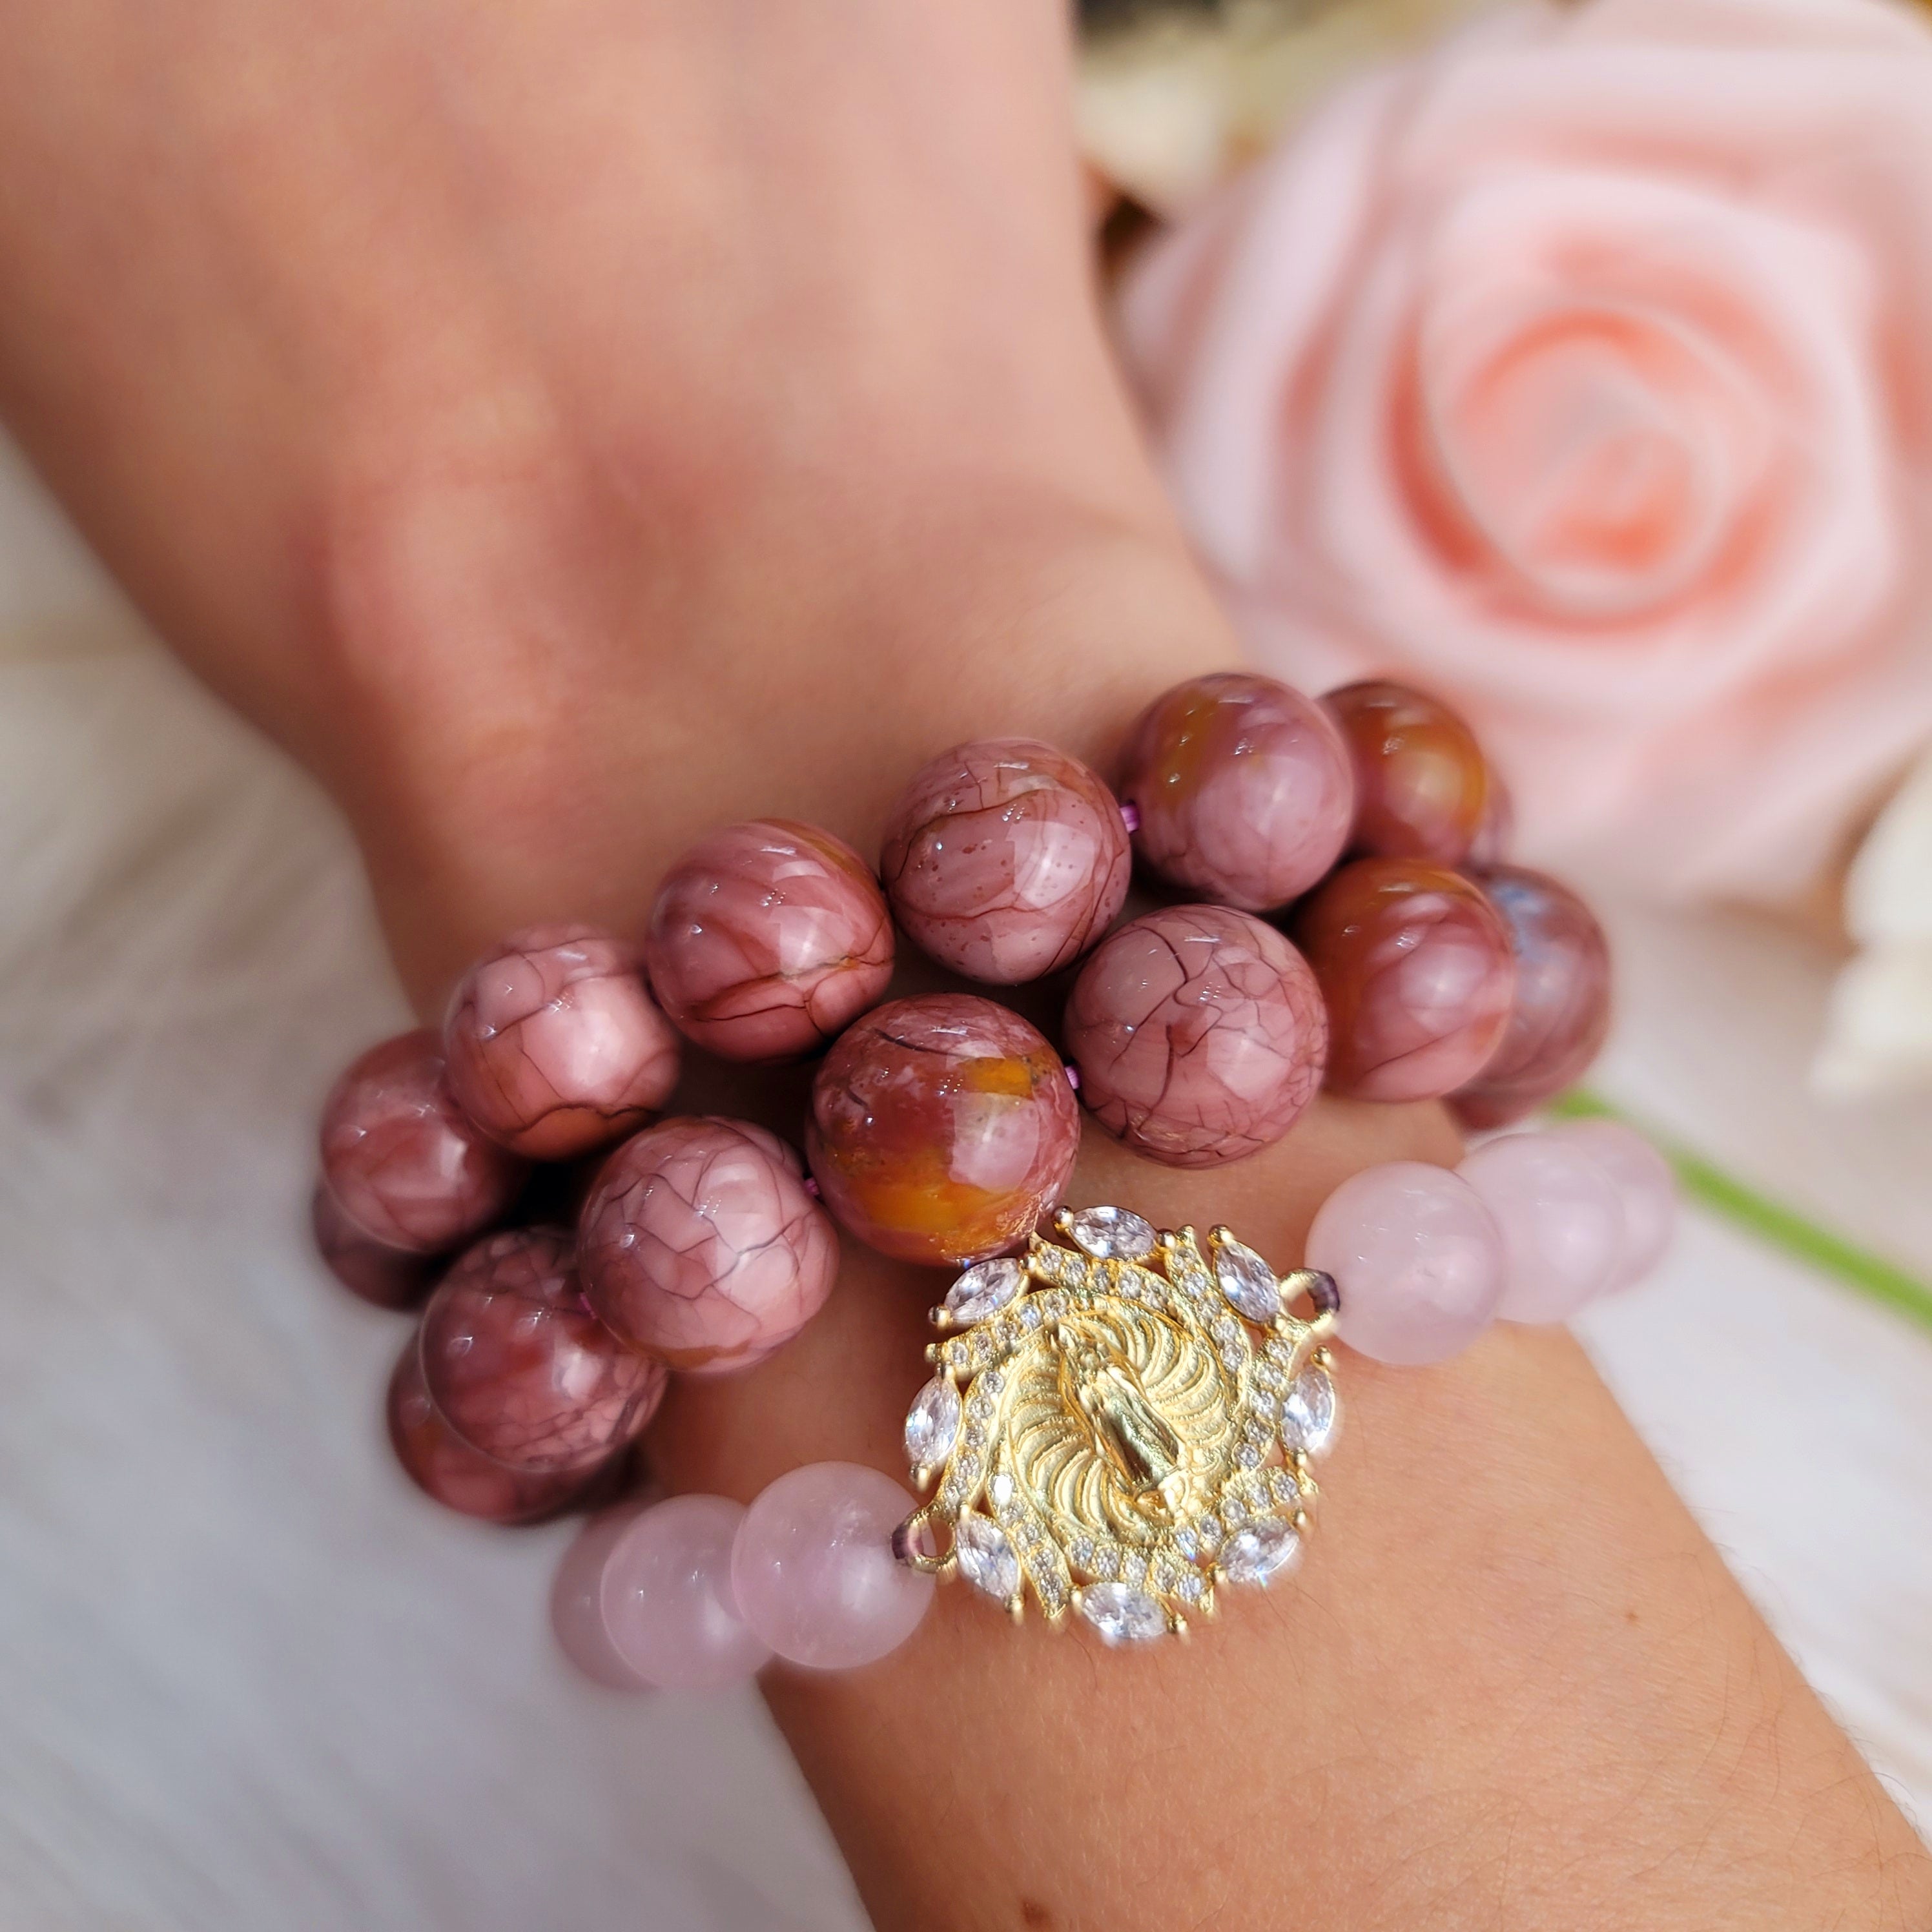 Purple Alashan Agate Bracelet (High Quality) for Chasing your Dreams, Enhanced Memory, Protection & Stress Relief